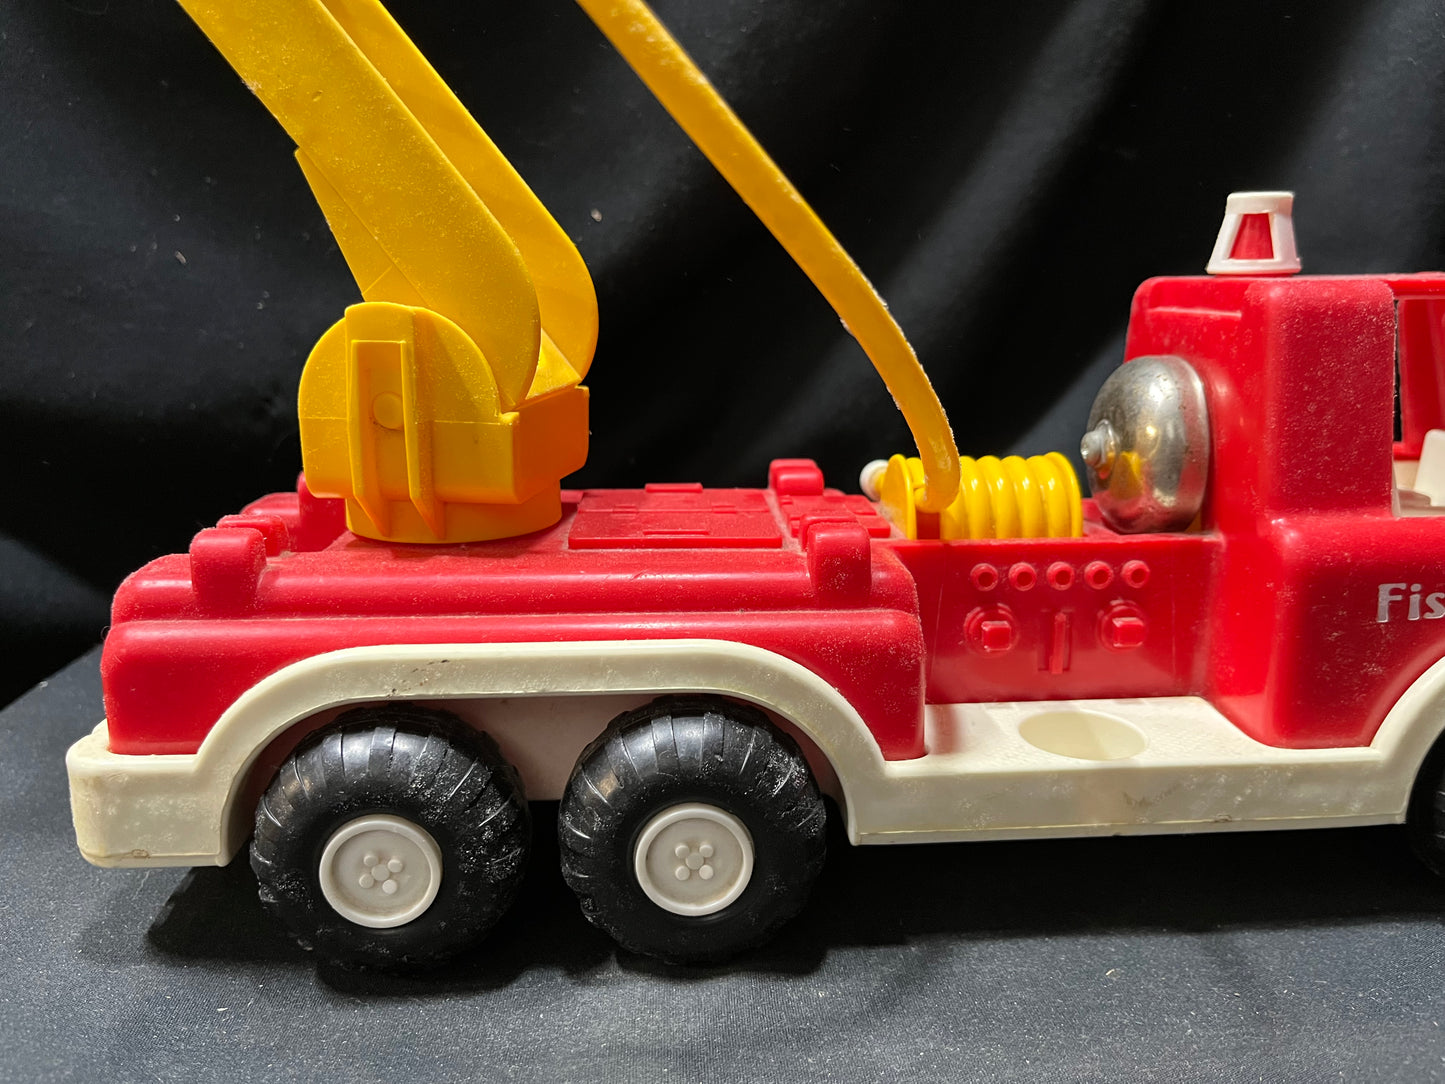 Fisher-Price Toy Fire Truck - Vintage 1988